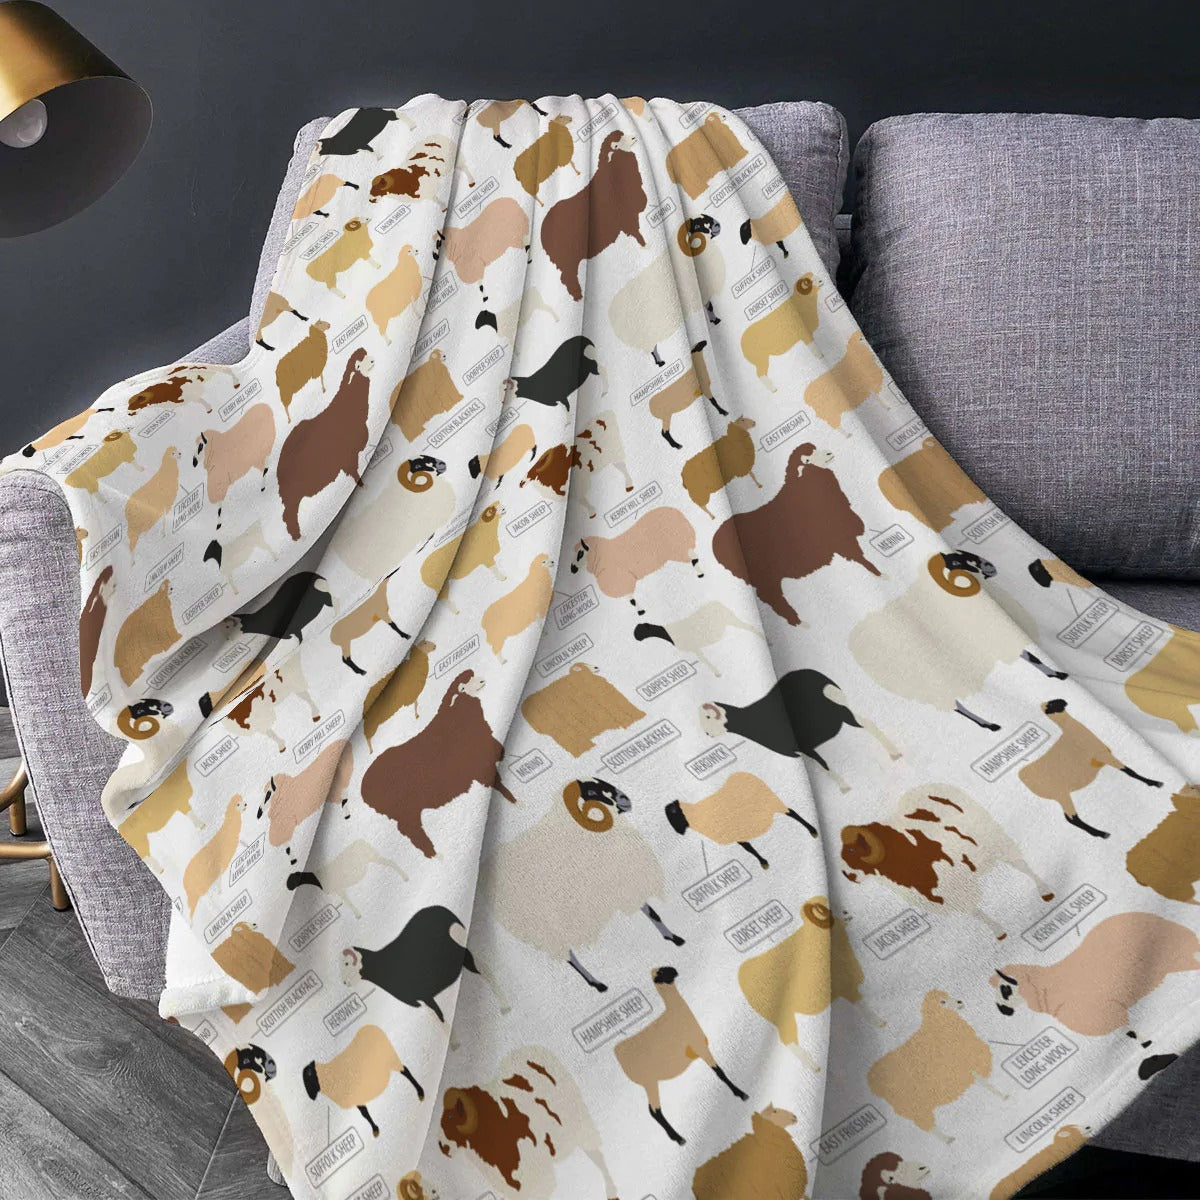 Sheep Breed Pattern Blanket/ Gift For Baby Throw Fleece Sherpa Blanket/ Baby Sheep Soft Cozy Blanket/ Baby Gift